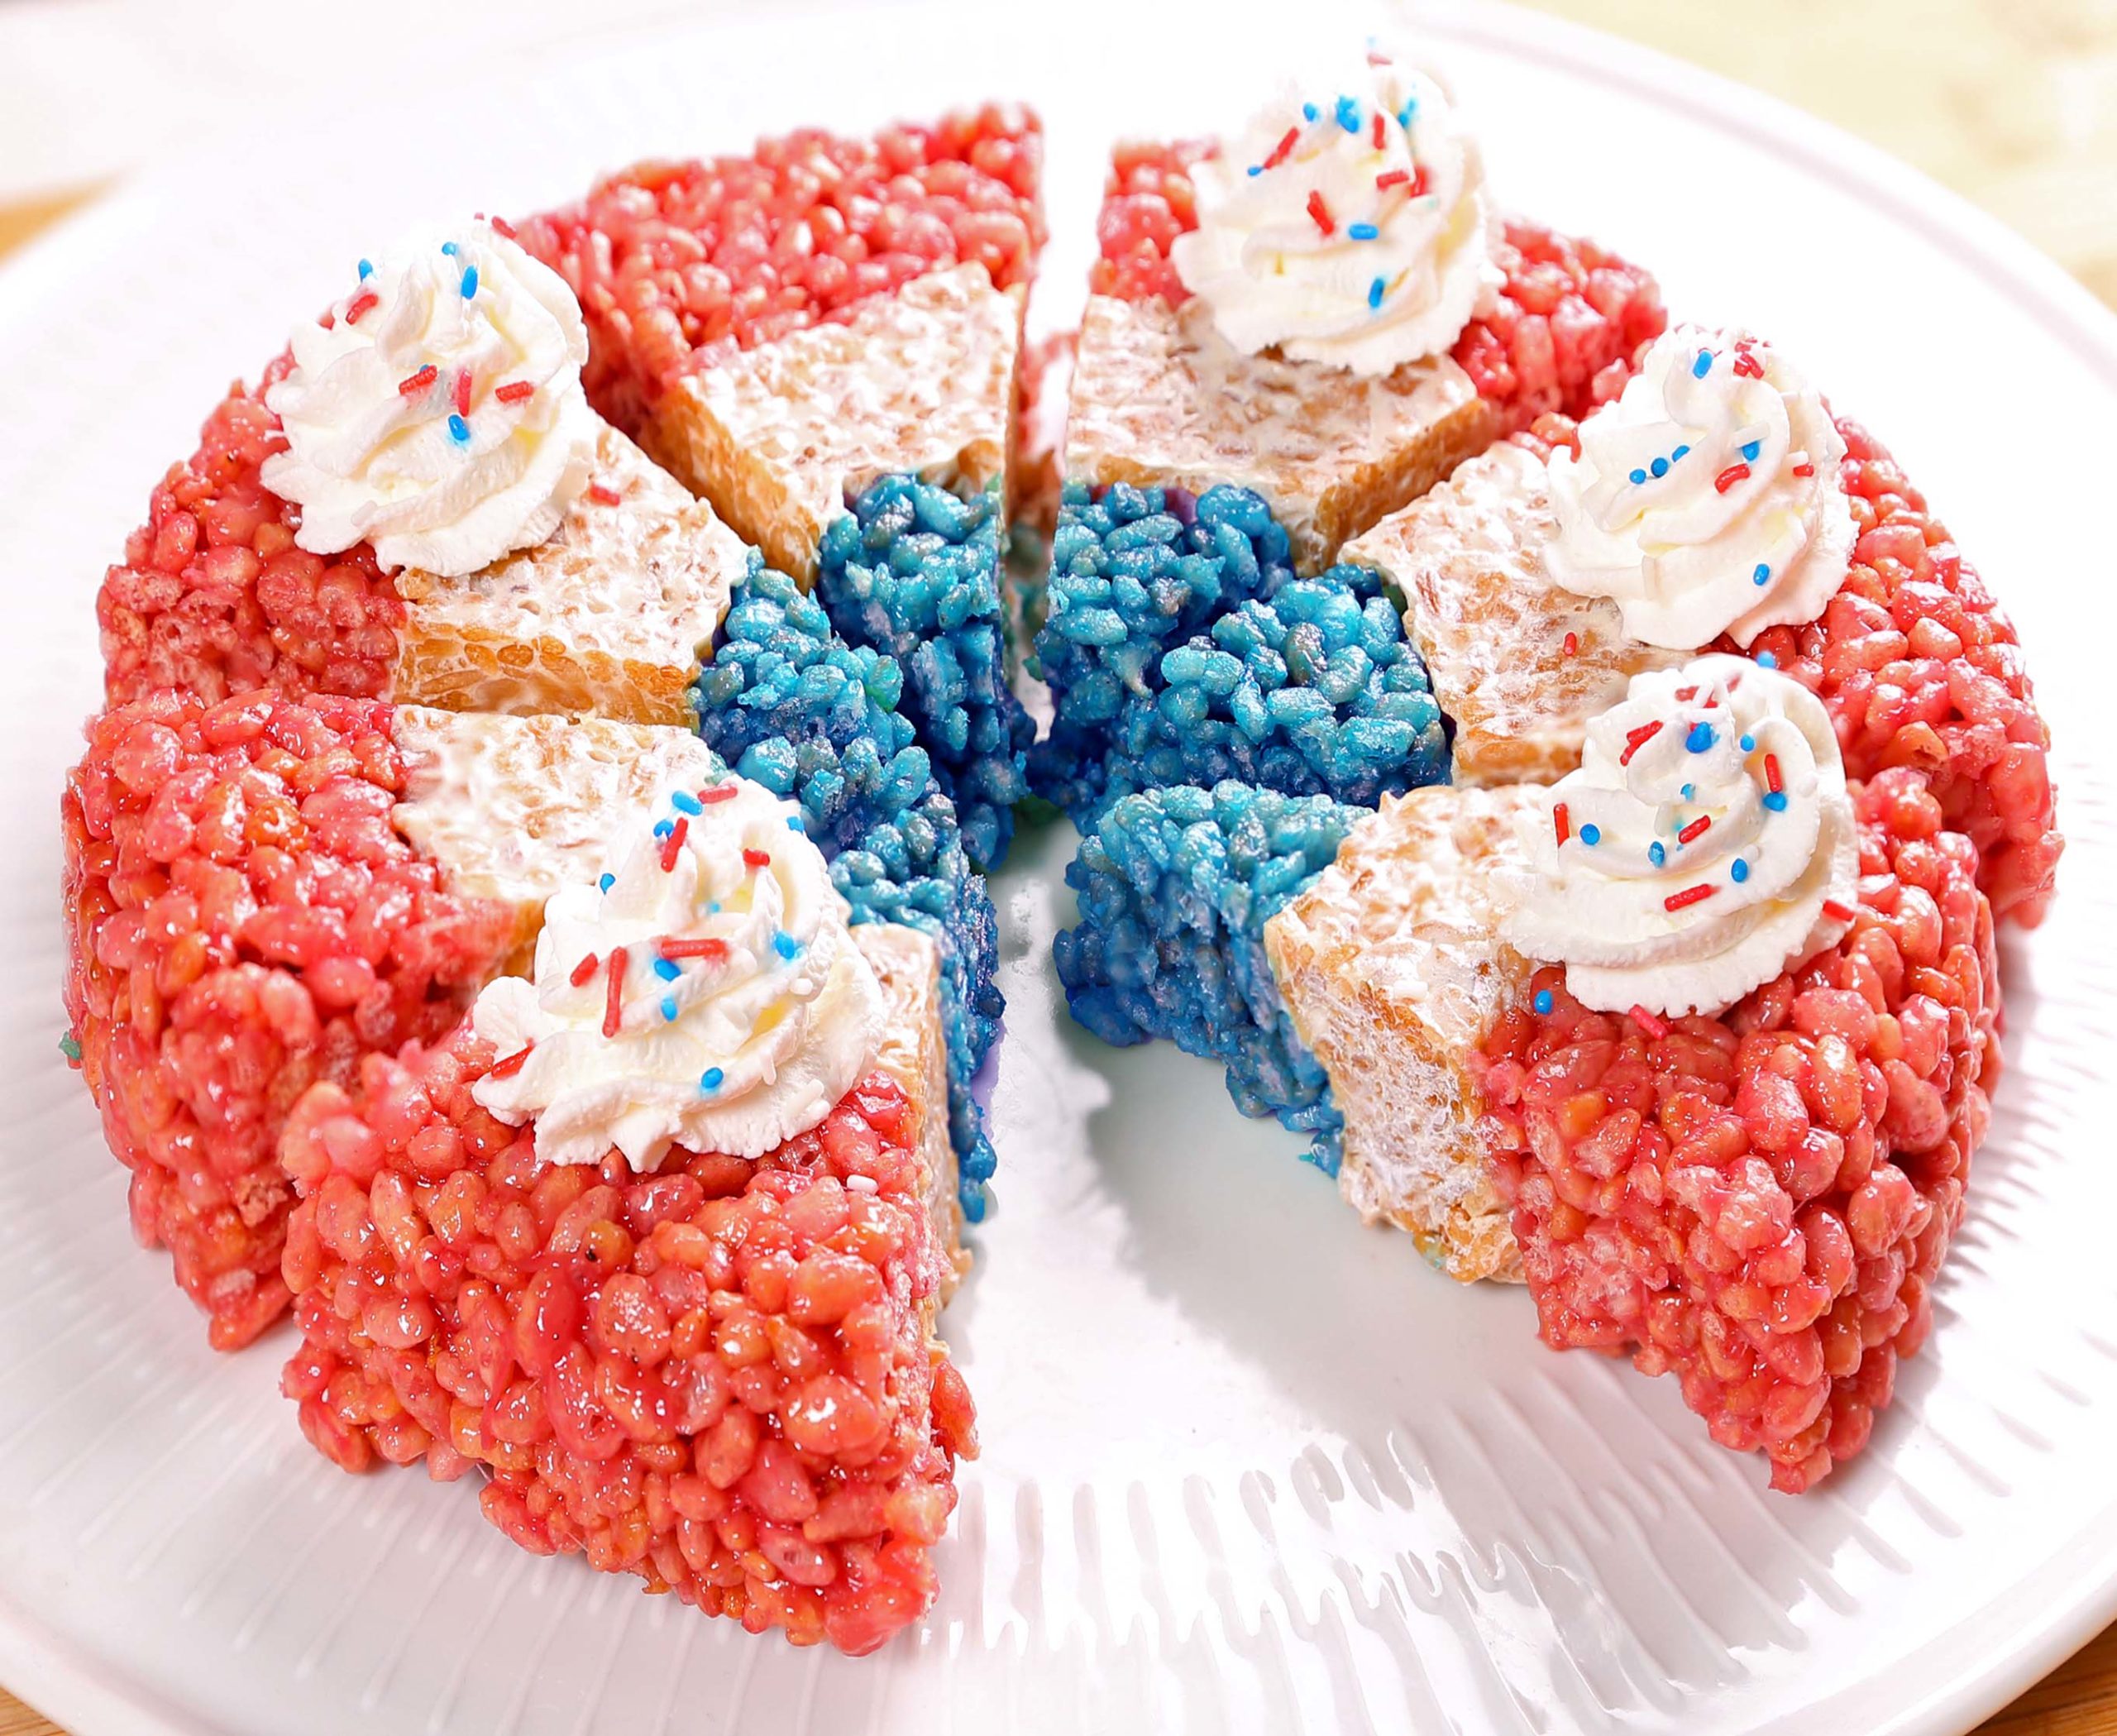 Delicious and Easy to make Red, White, and Blue Rice Krispie Treats Are Always A Hit, And Festive For the 4th of July or Memorial Day, or any Patriotic Occasion.